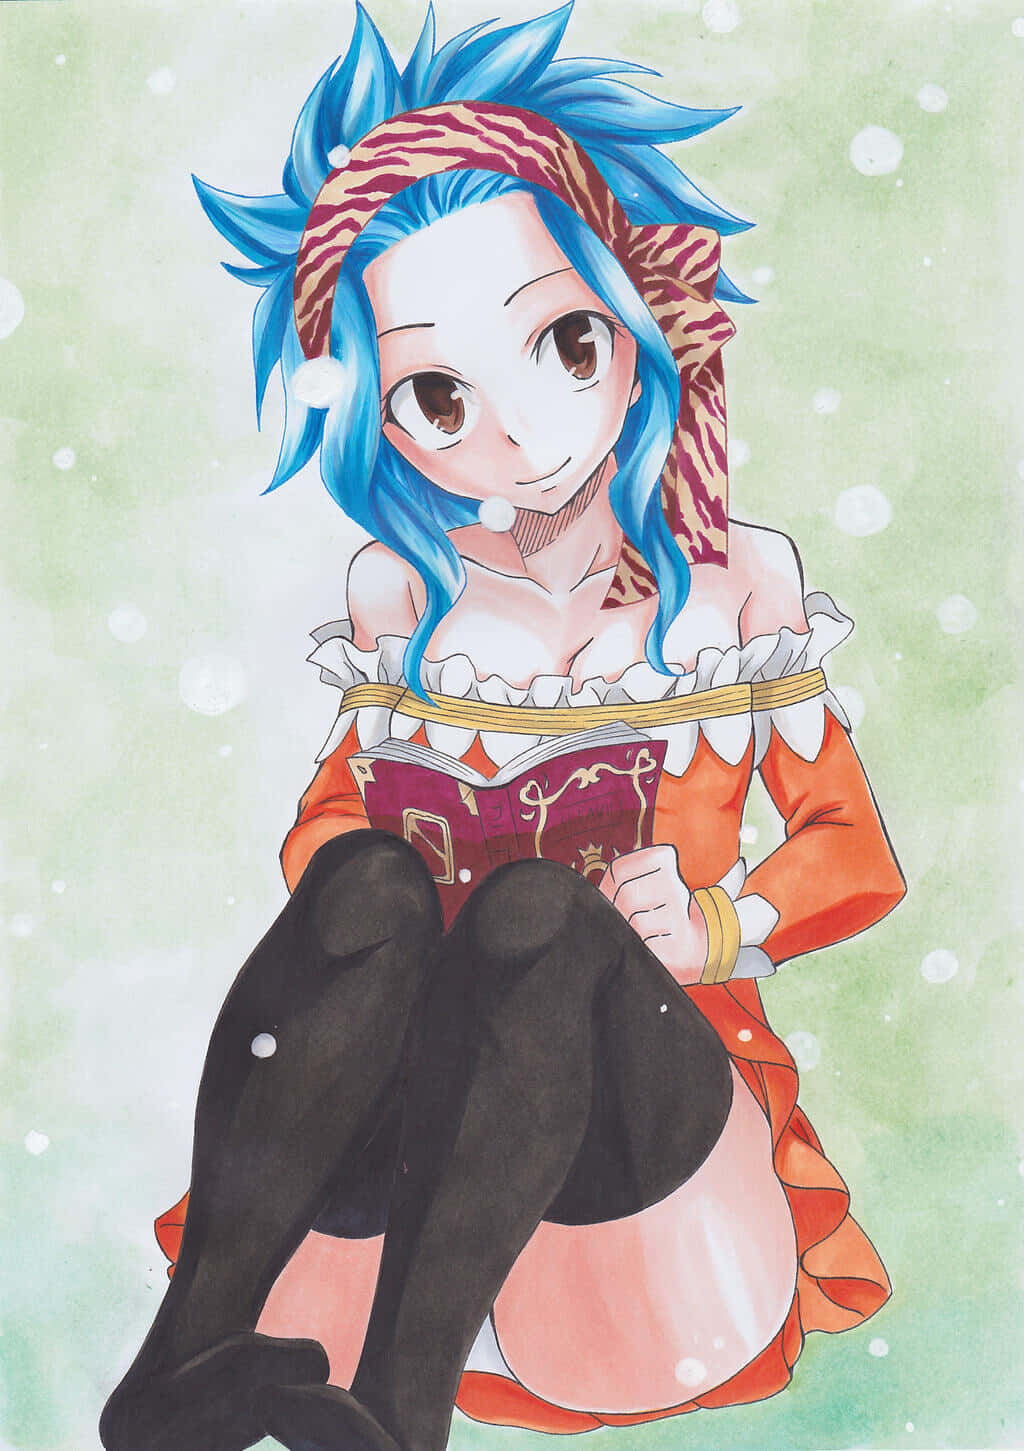 Levy McGarden posing confidently while reading her magic tome Wallpaper